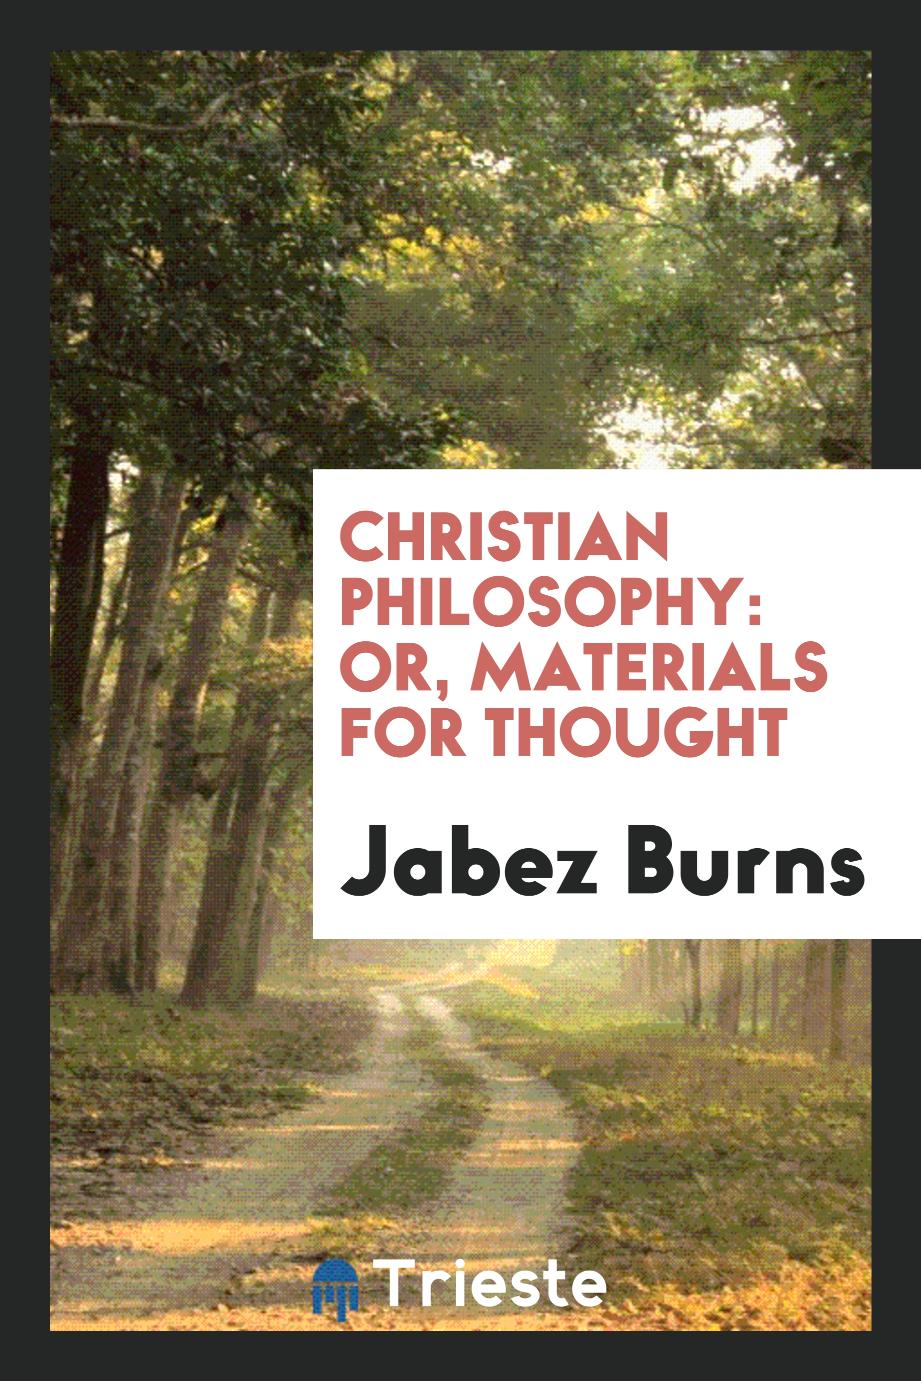 Christian philosophy: or, Materials for thought